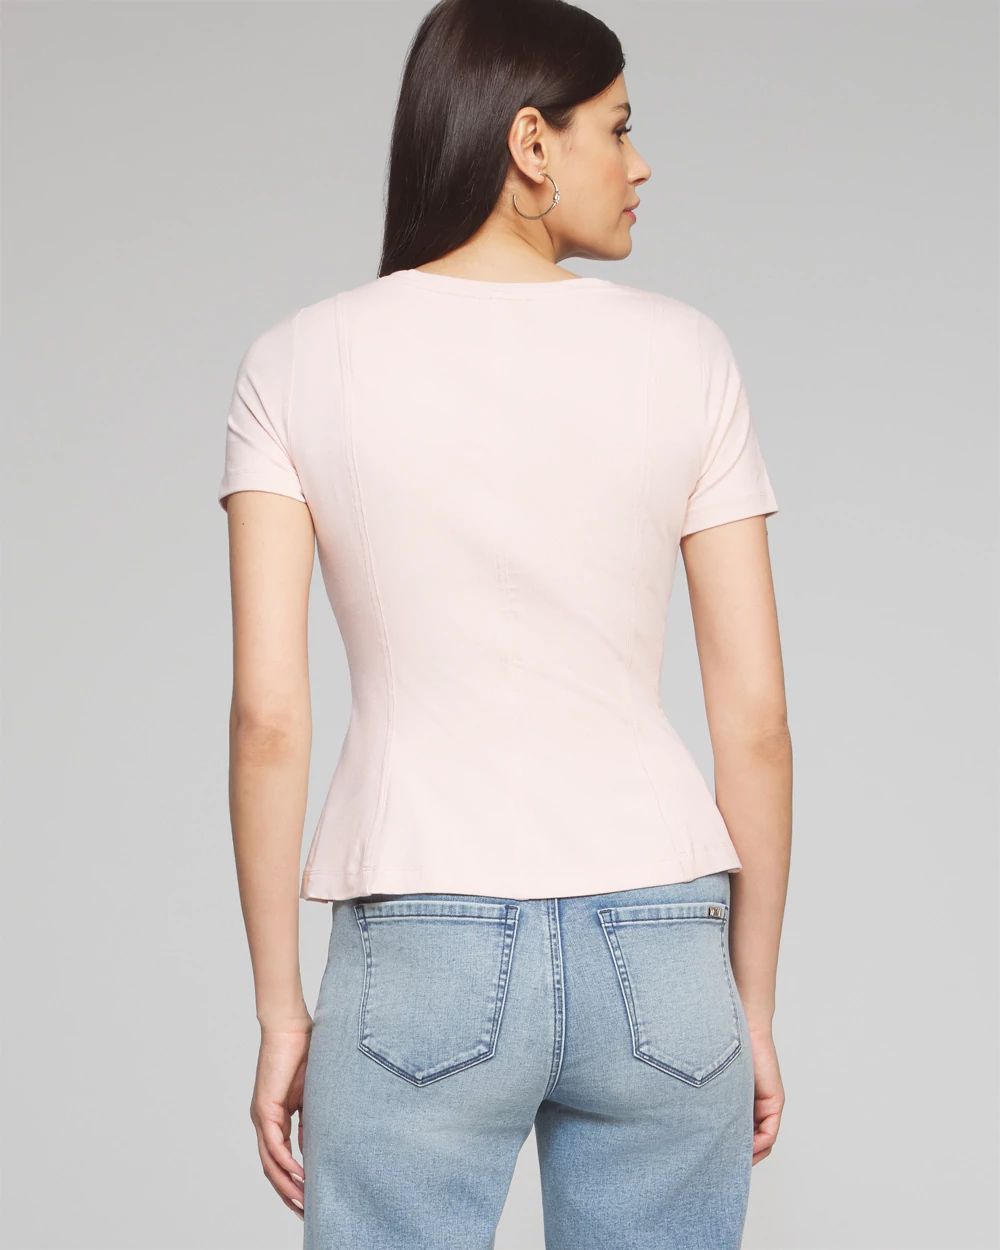 Outlet WHBM Short Sleeve Peplum Tee click to view larger image.